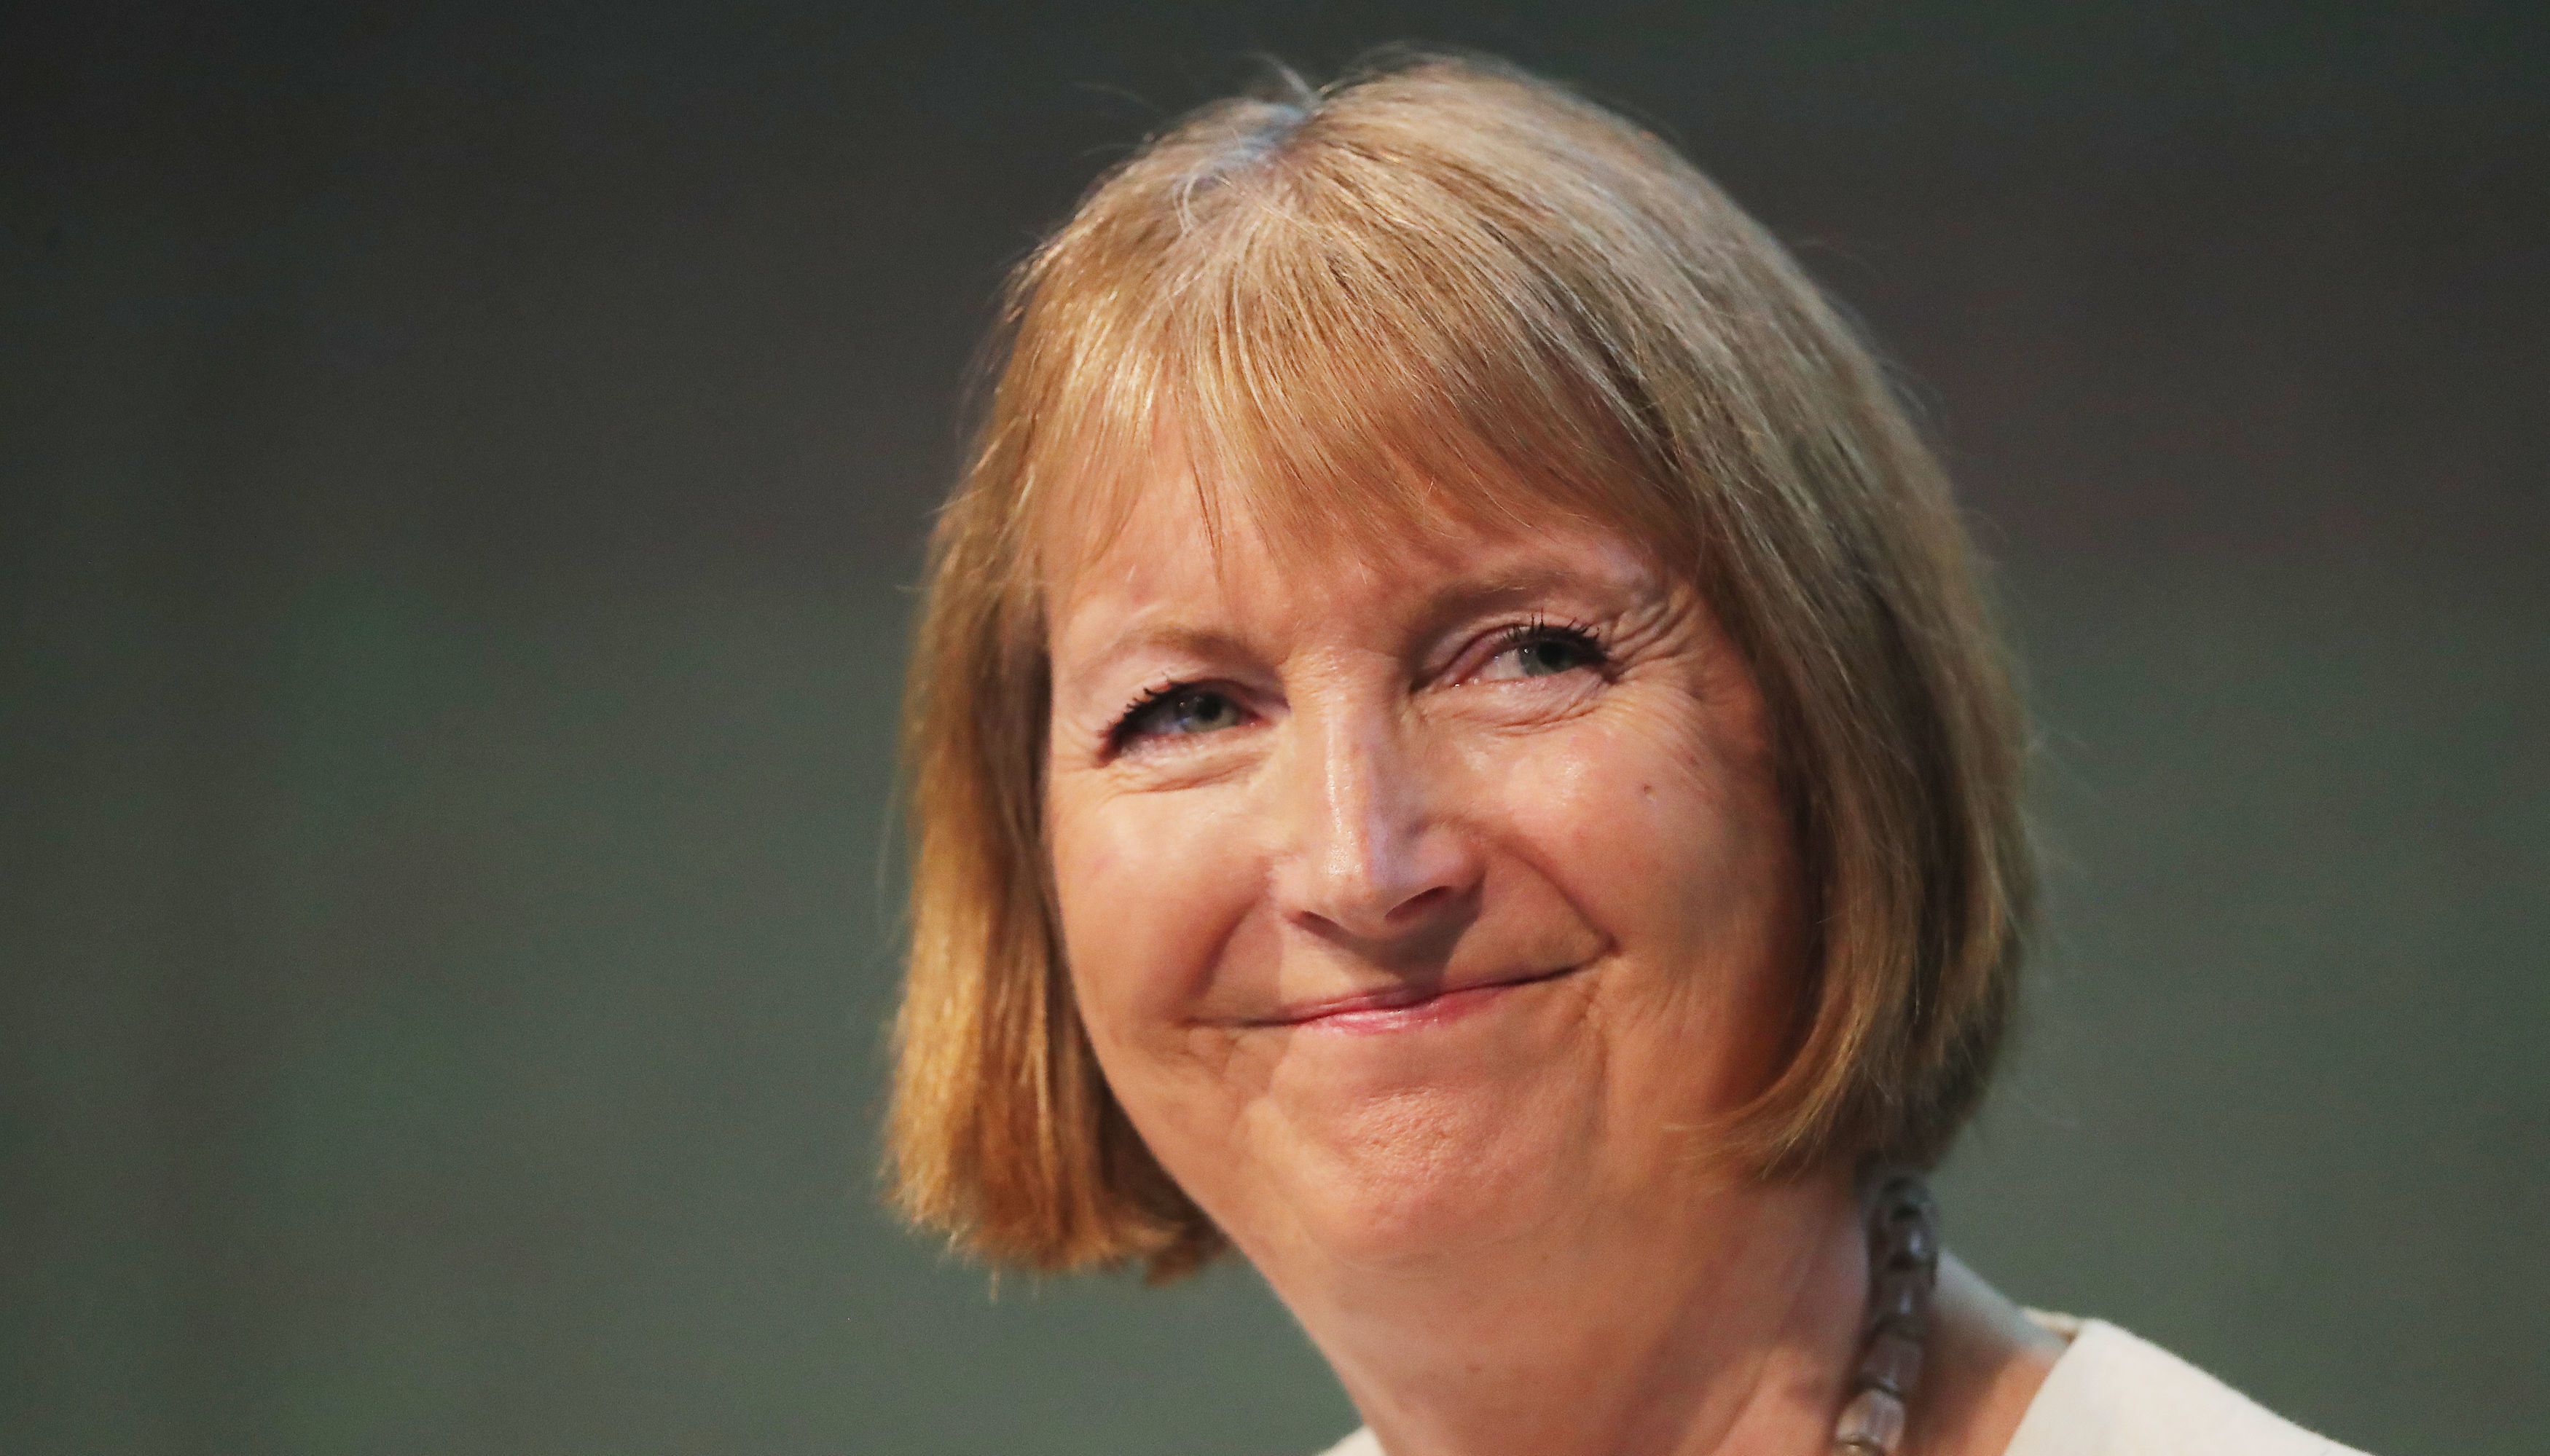 Harriet Harman is set to lead the investigation